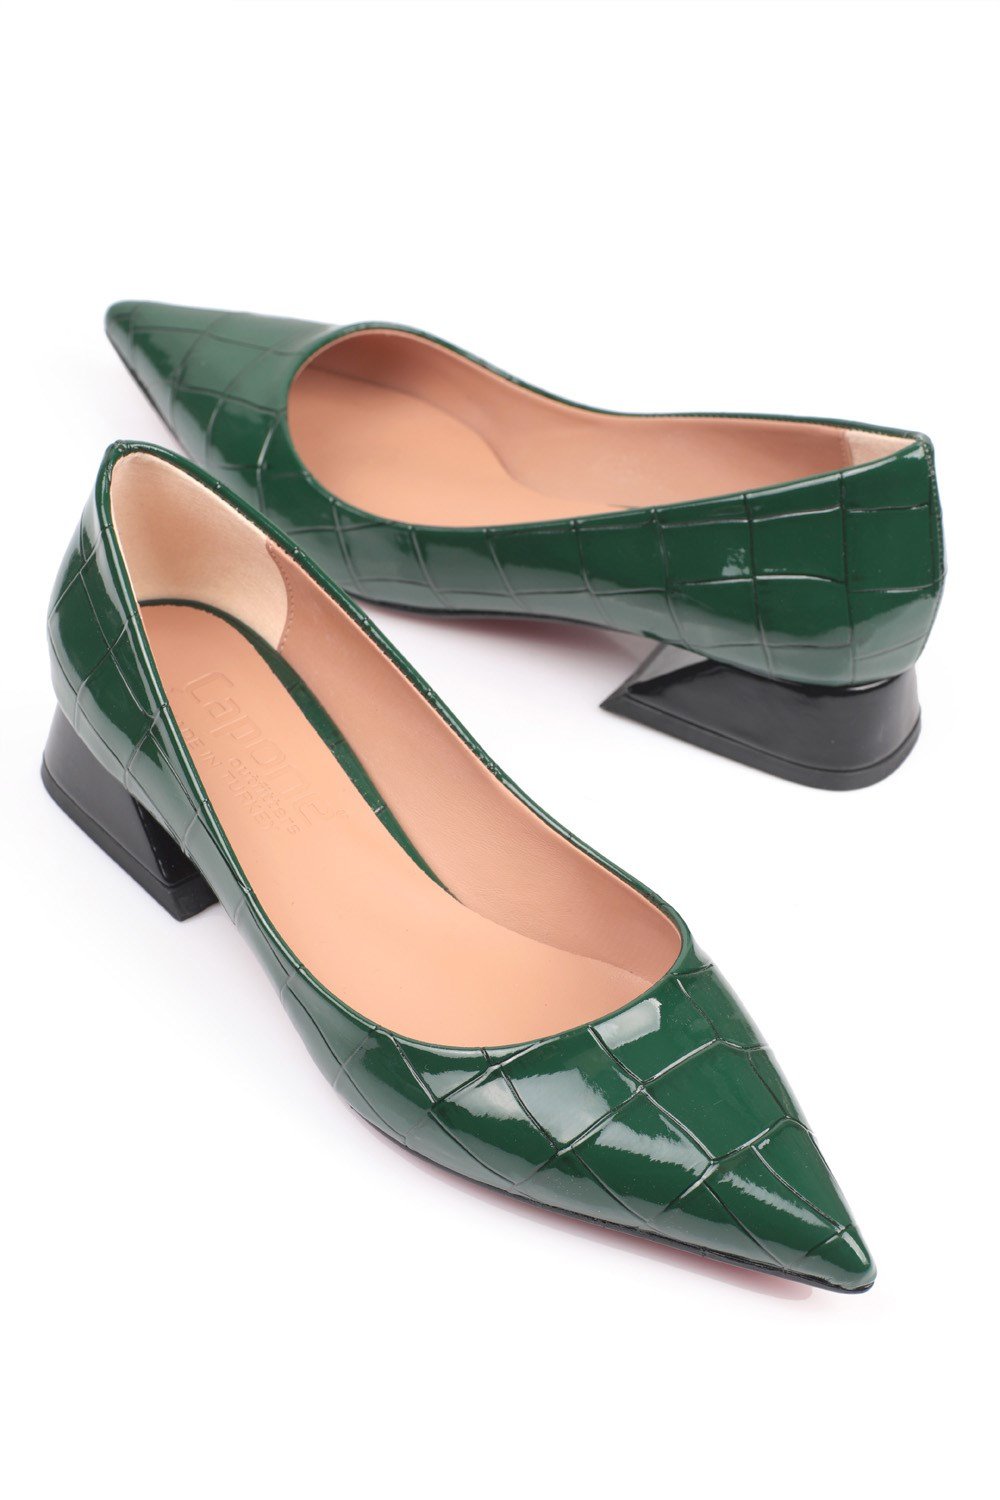 Capone Jessica Low Heel Women Dark Green Shoes | caponeoutfitters.com